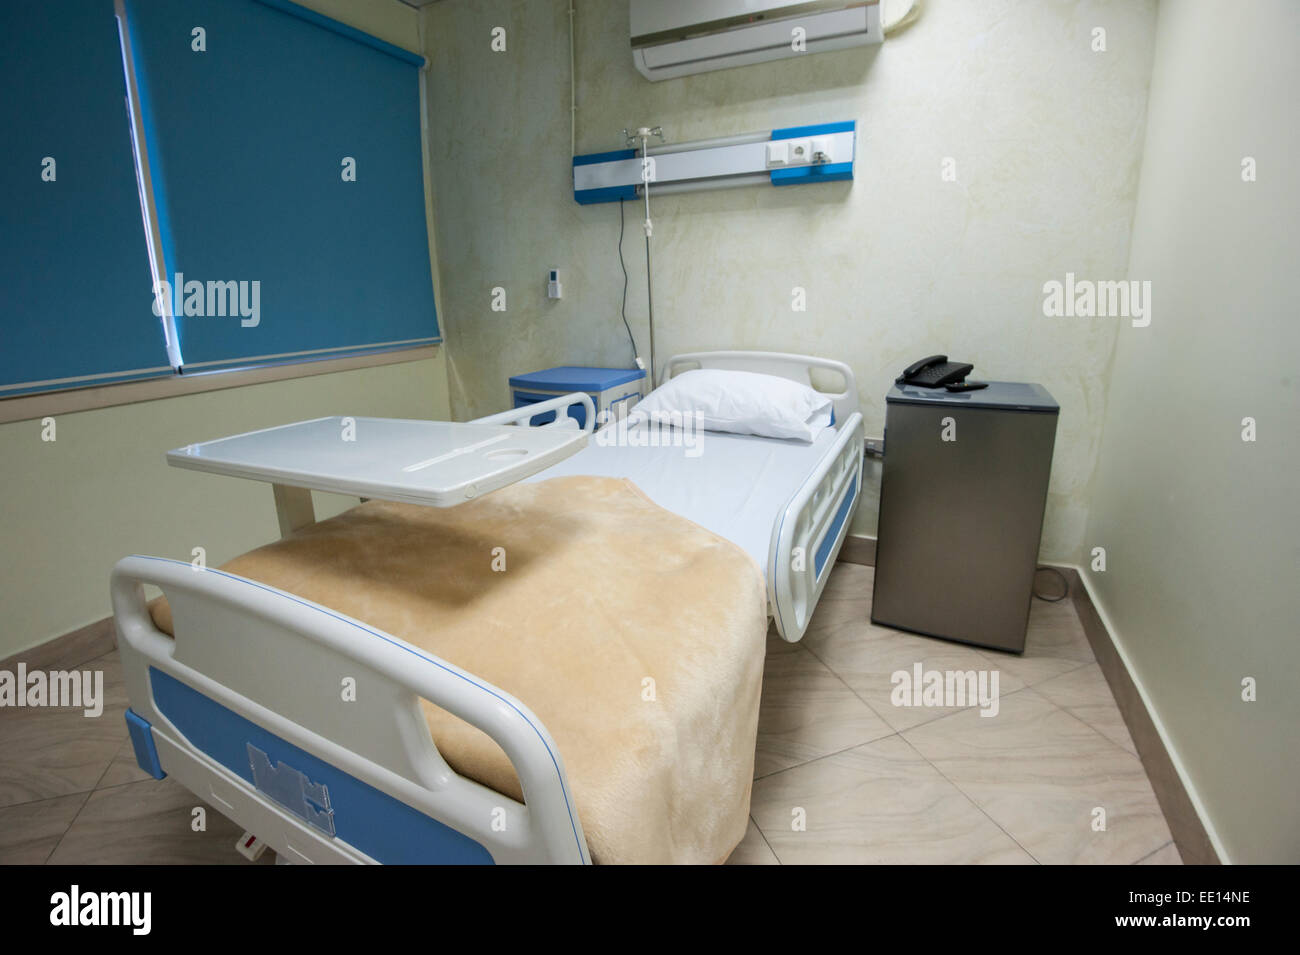 Bed in a private hospital medical center ward room Stock Photo